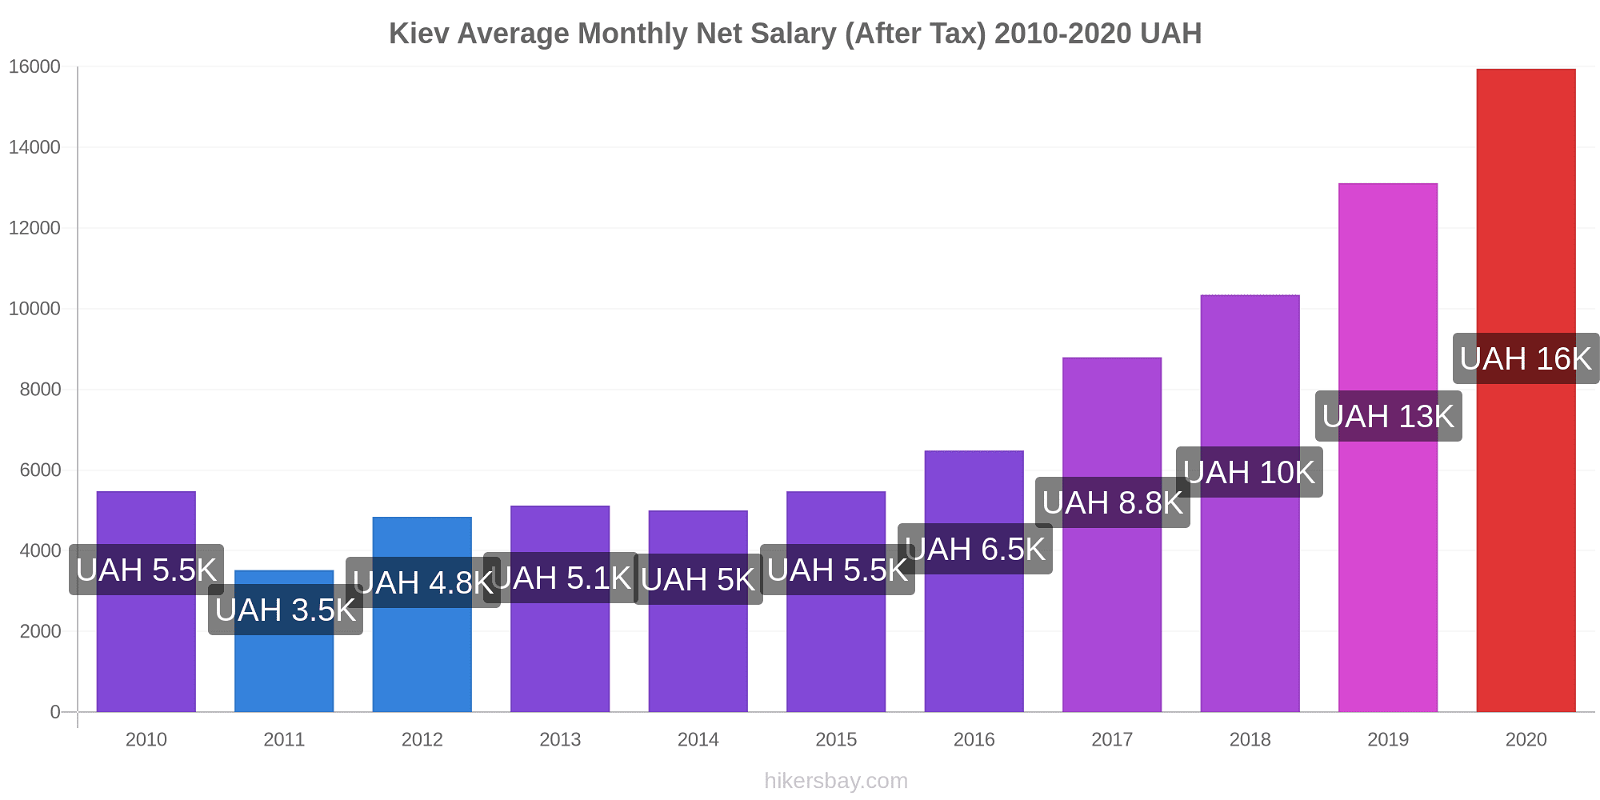 Kiev price changes Average Monthly Net Salary (After Tax) hikersbay.com